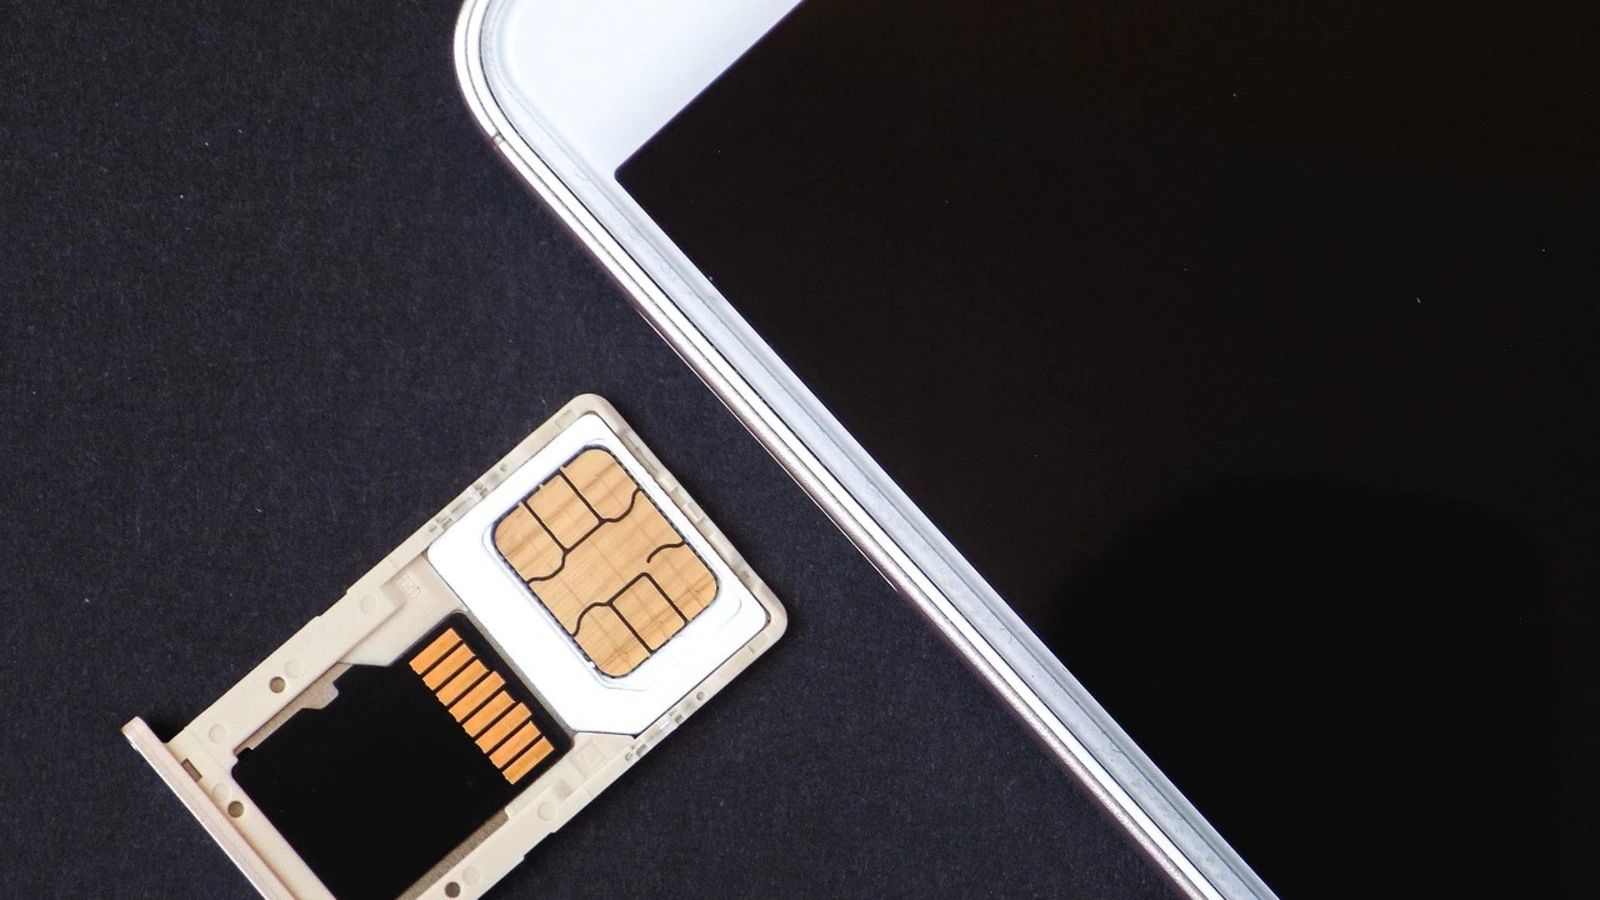 changing-sim-card-in-iphone-5c-a-step-by-step-guide